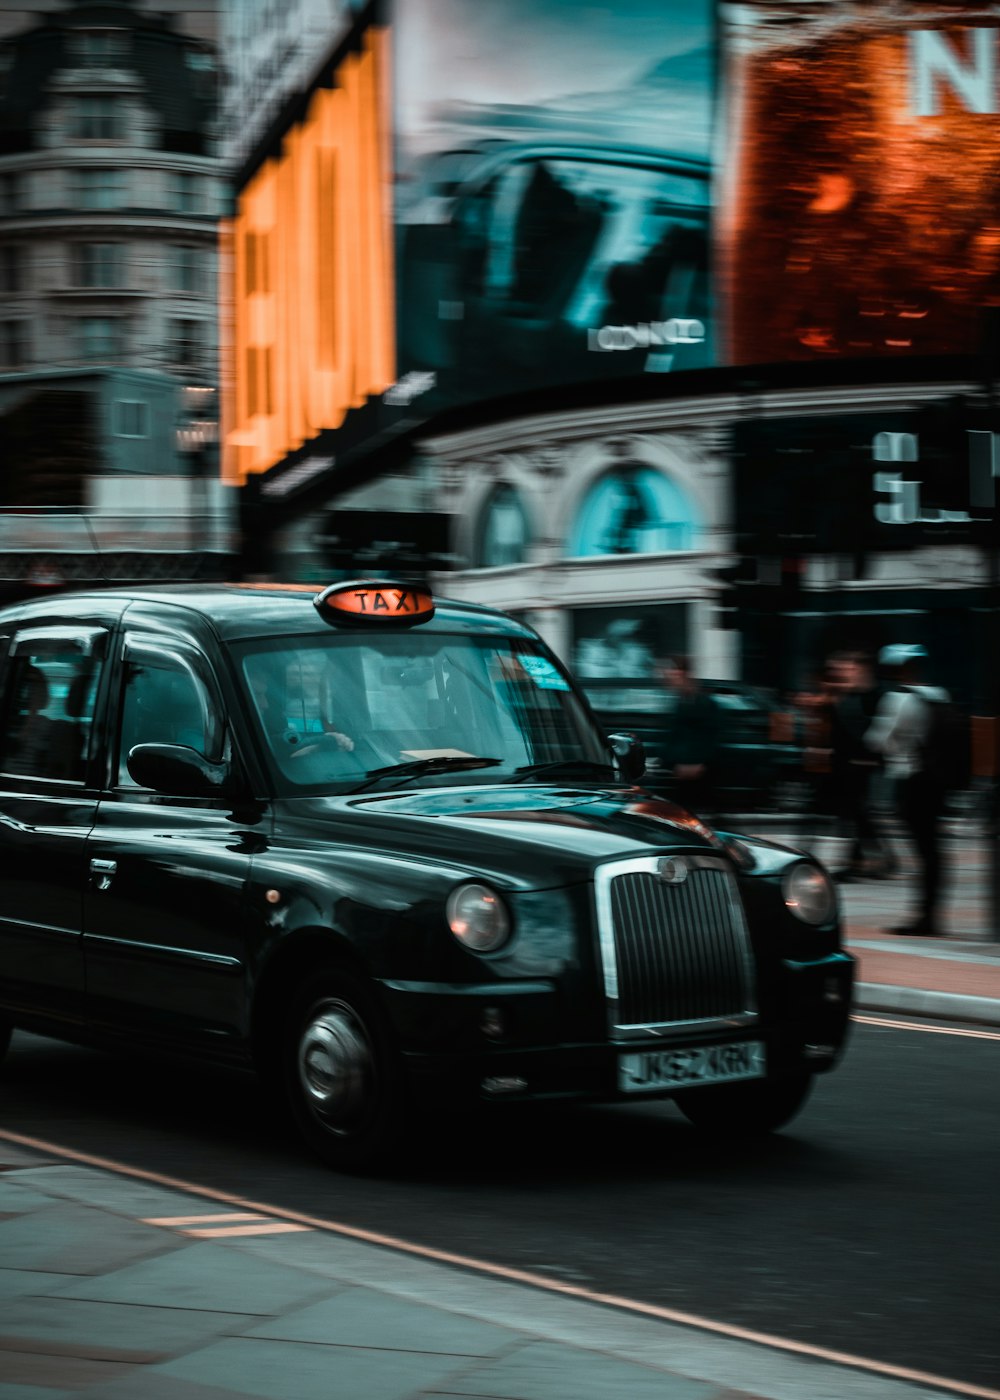 a black cab driving down a street next to tall buildings